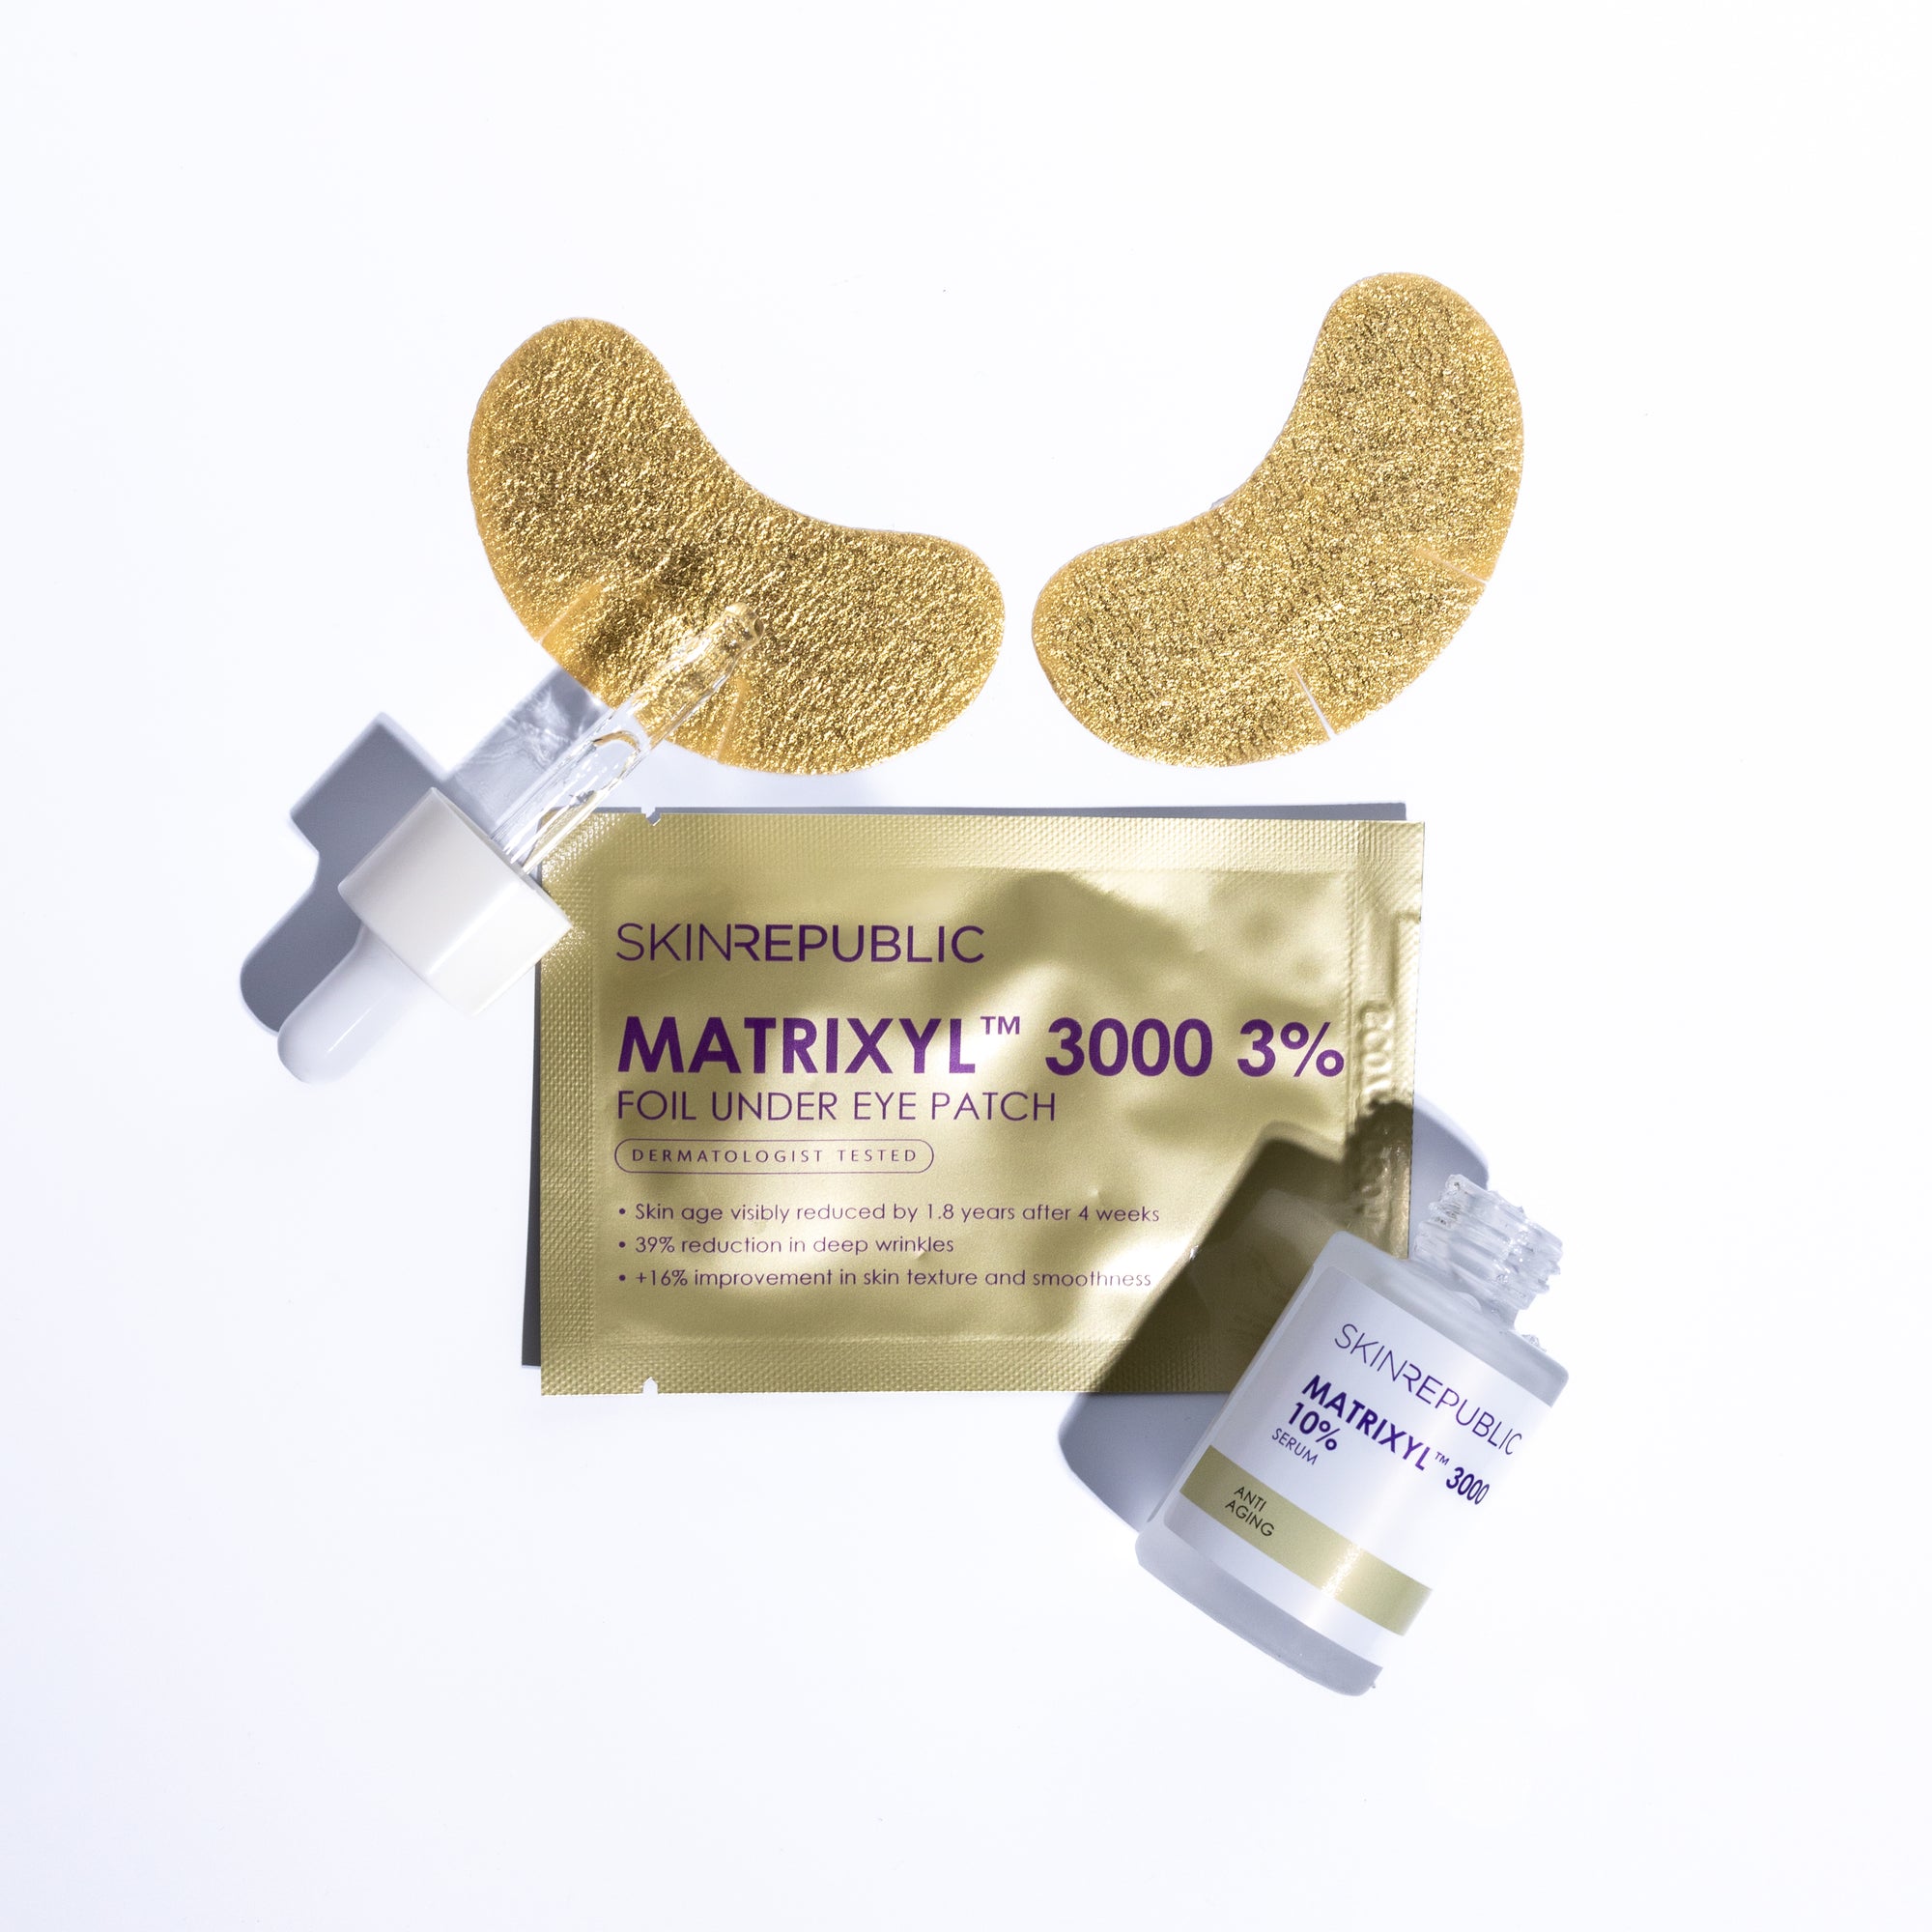 Bright Eyes, Youthful Glance: Matrixyl Under Eye Patches That Really Work